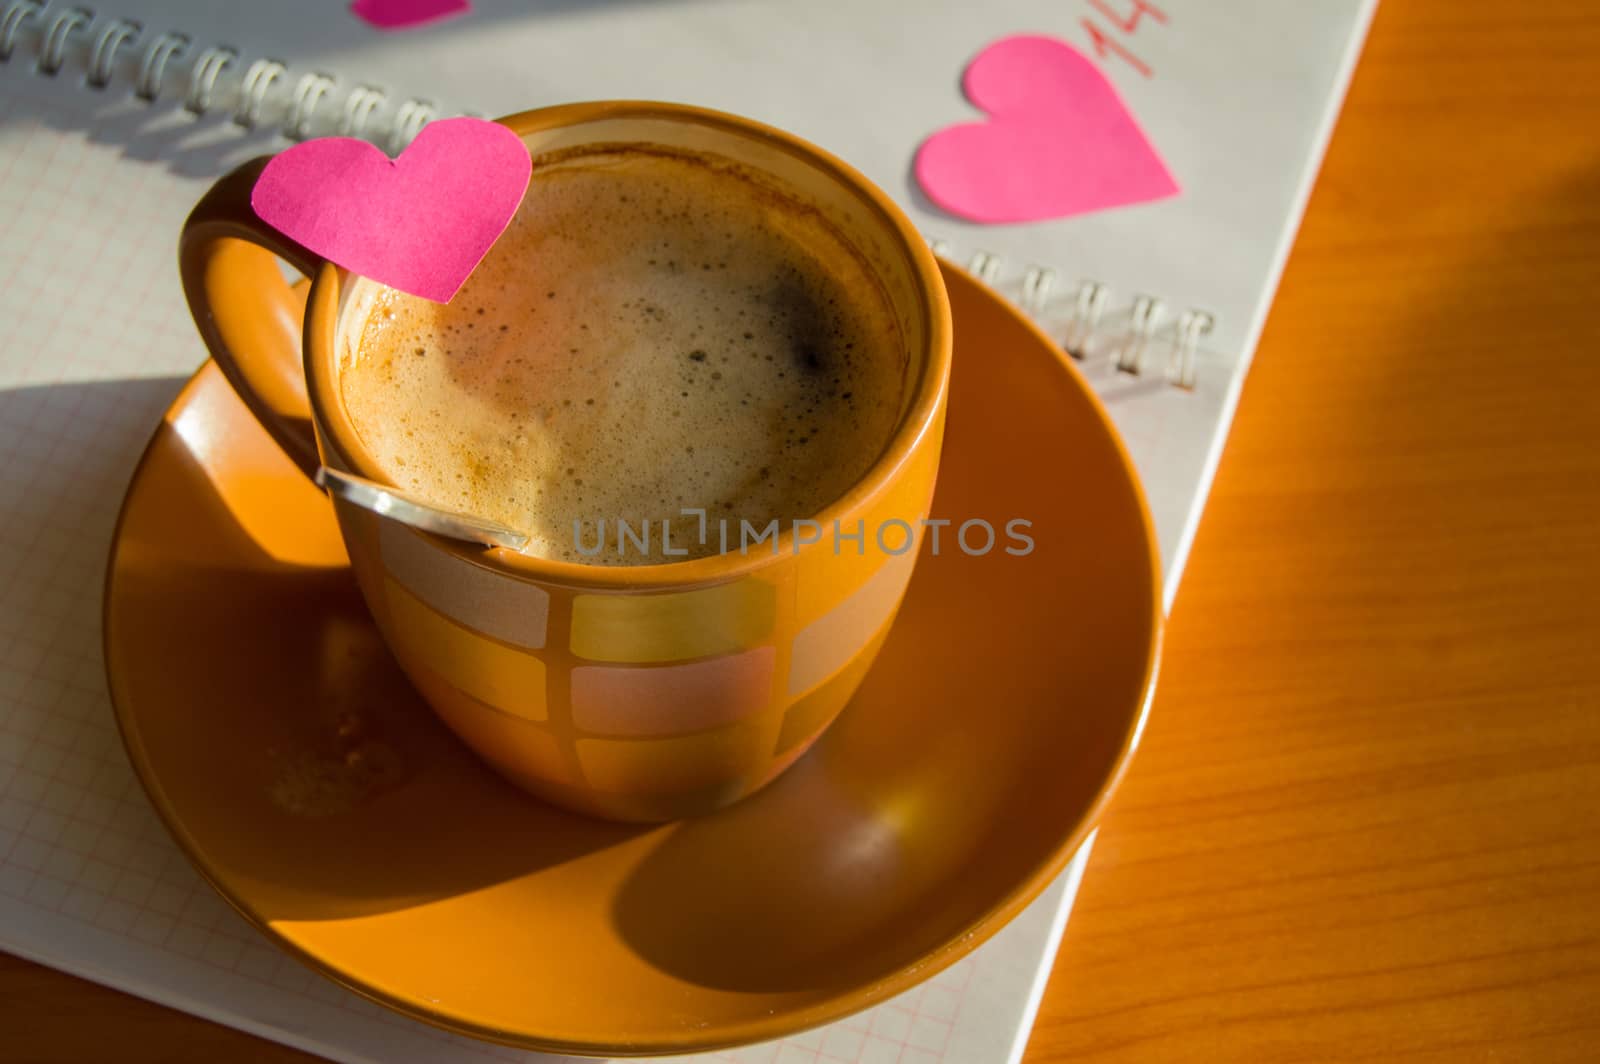 Preparation for Valentine's Day: the notebook and hearts, Cup of coffee, close-up.